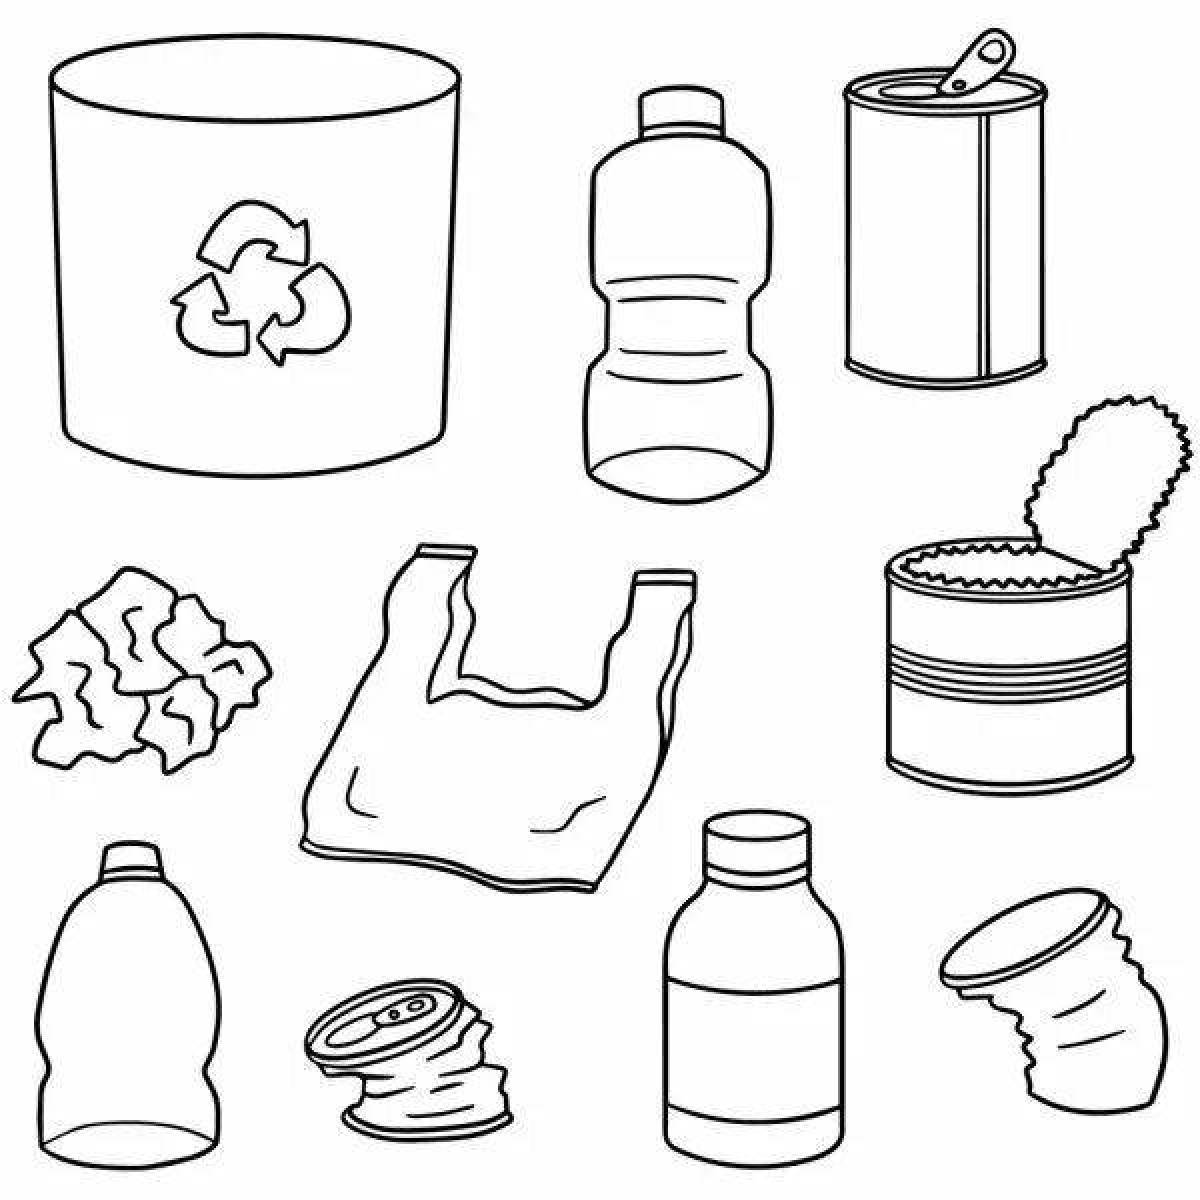 Colorful garbage coloring page